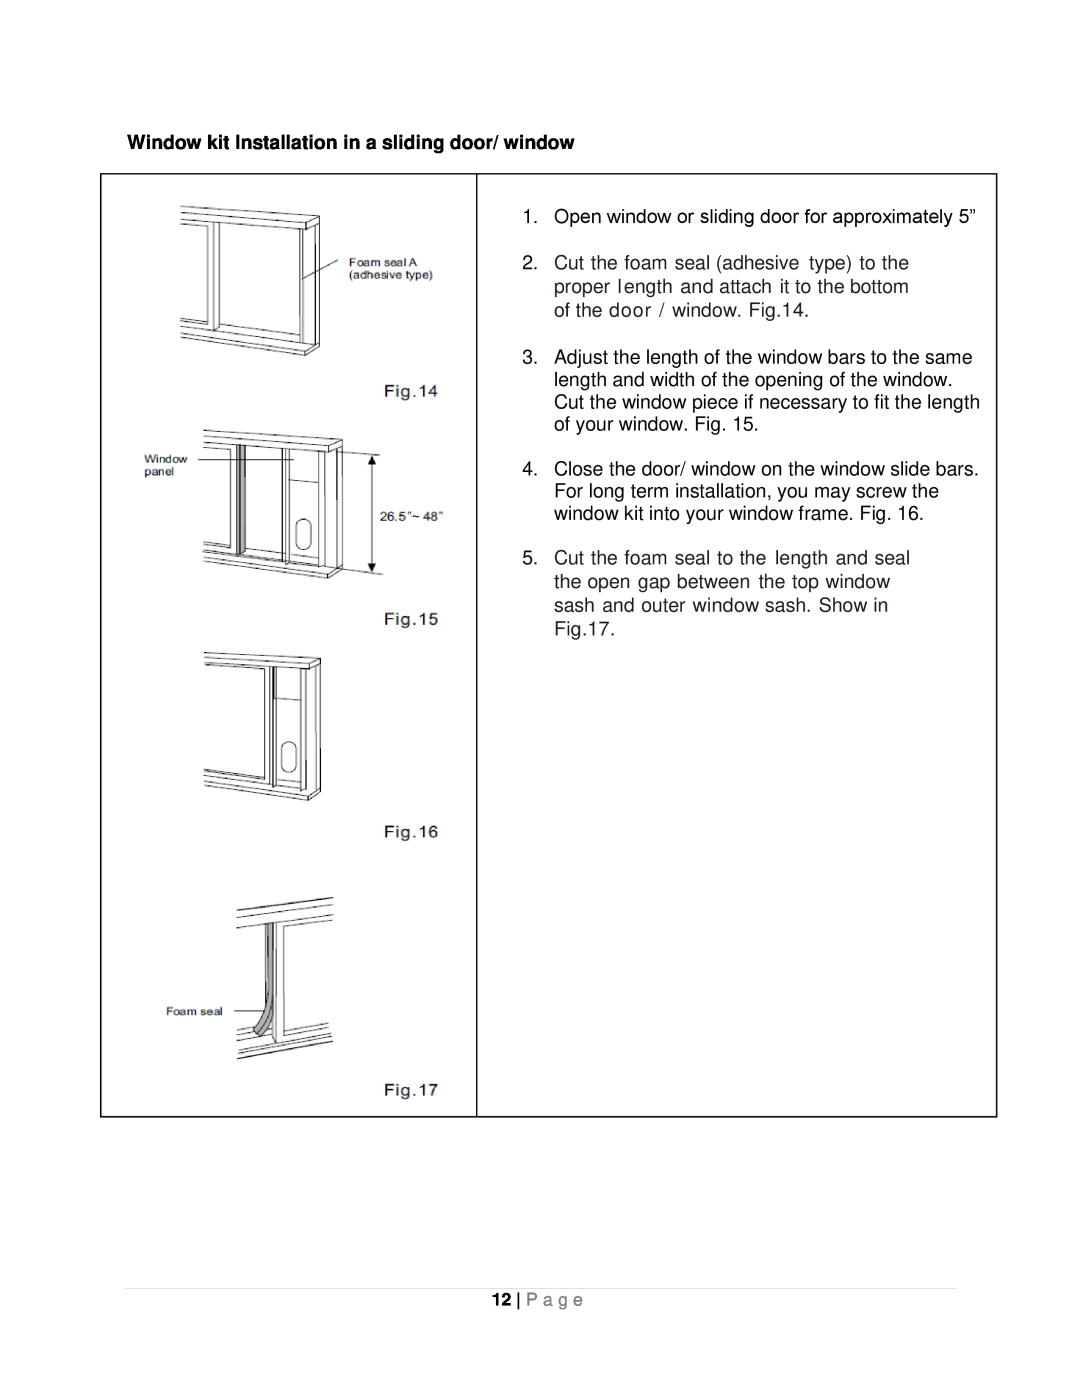 Whynter ARC-10WB instruction manual Window kit Installation in a sliding door/ window, P a g e 